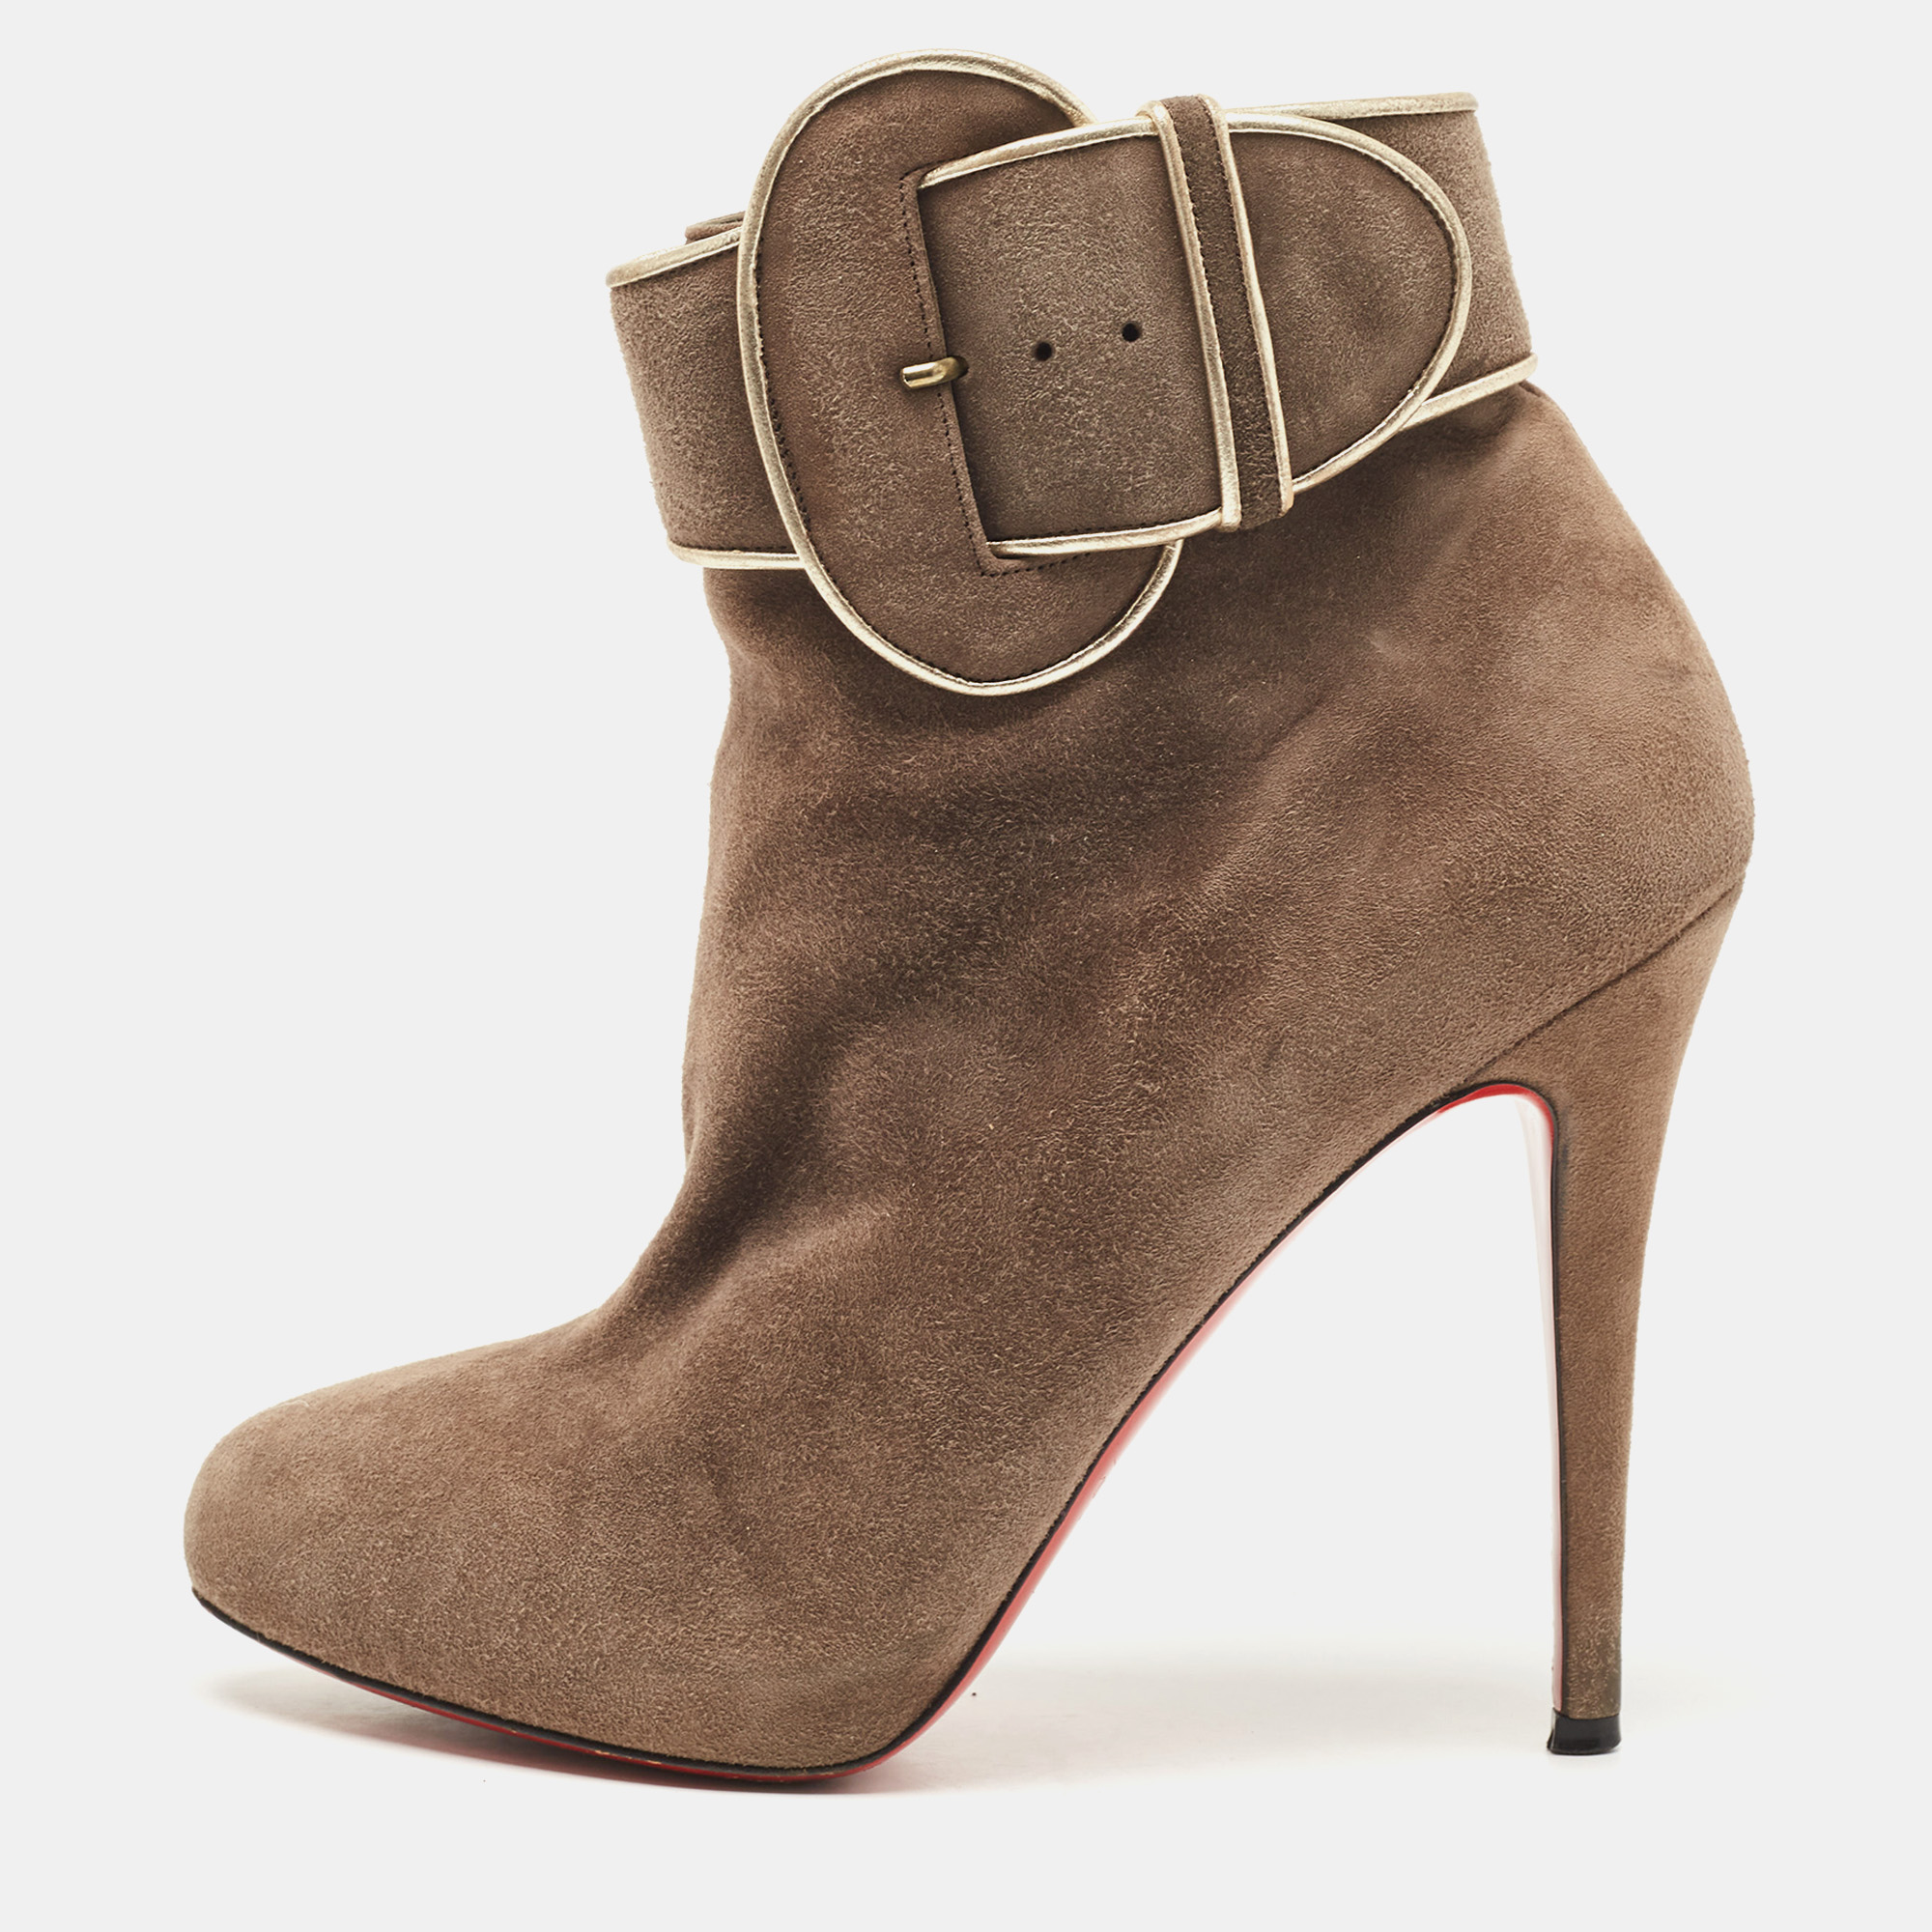 Christian louboutin brown suede trottinette ankle booties size 39.5